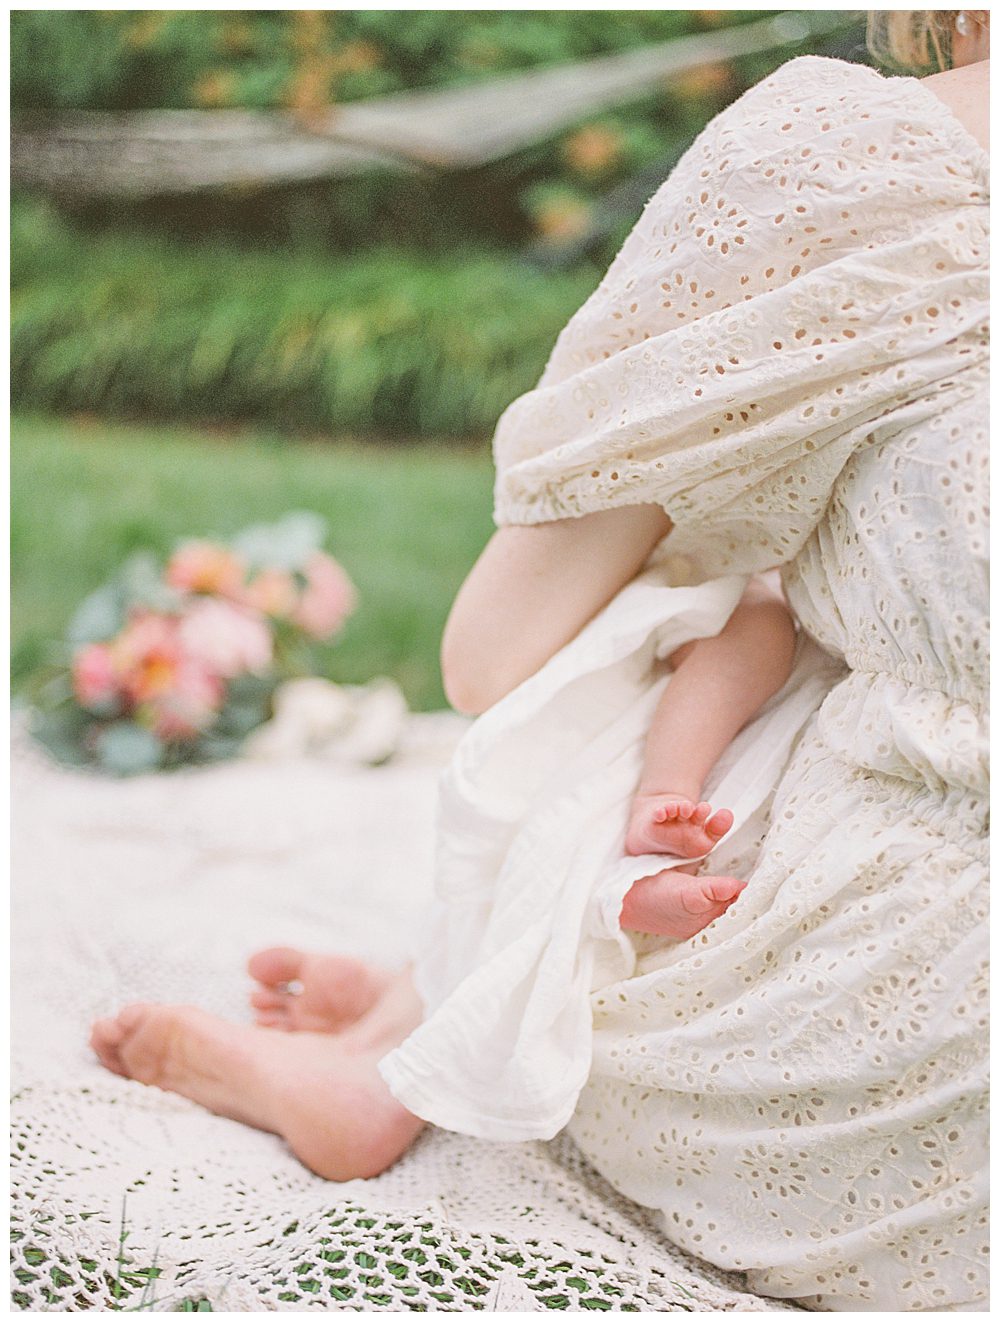 Tiny baby toes peek from behind mother while baby is held in a garden.